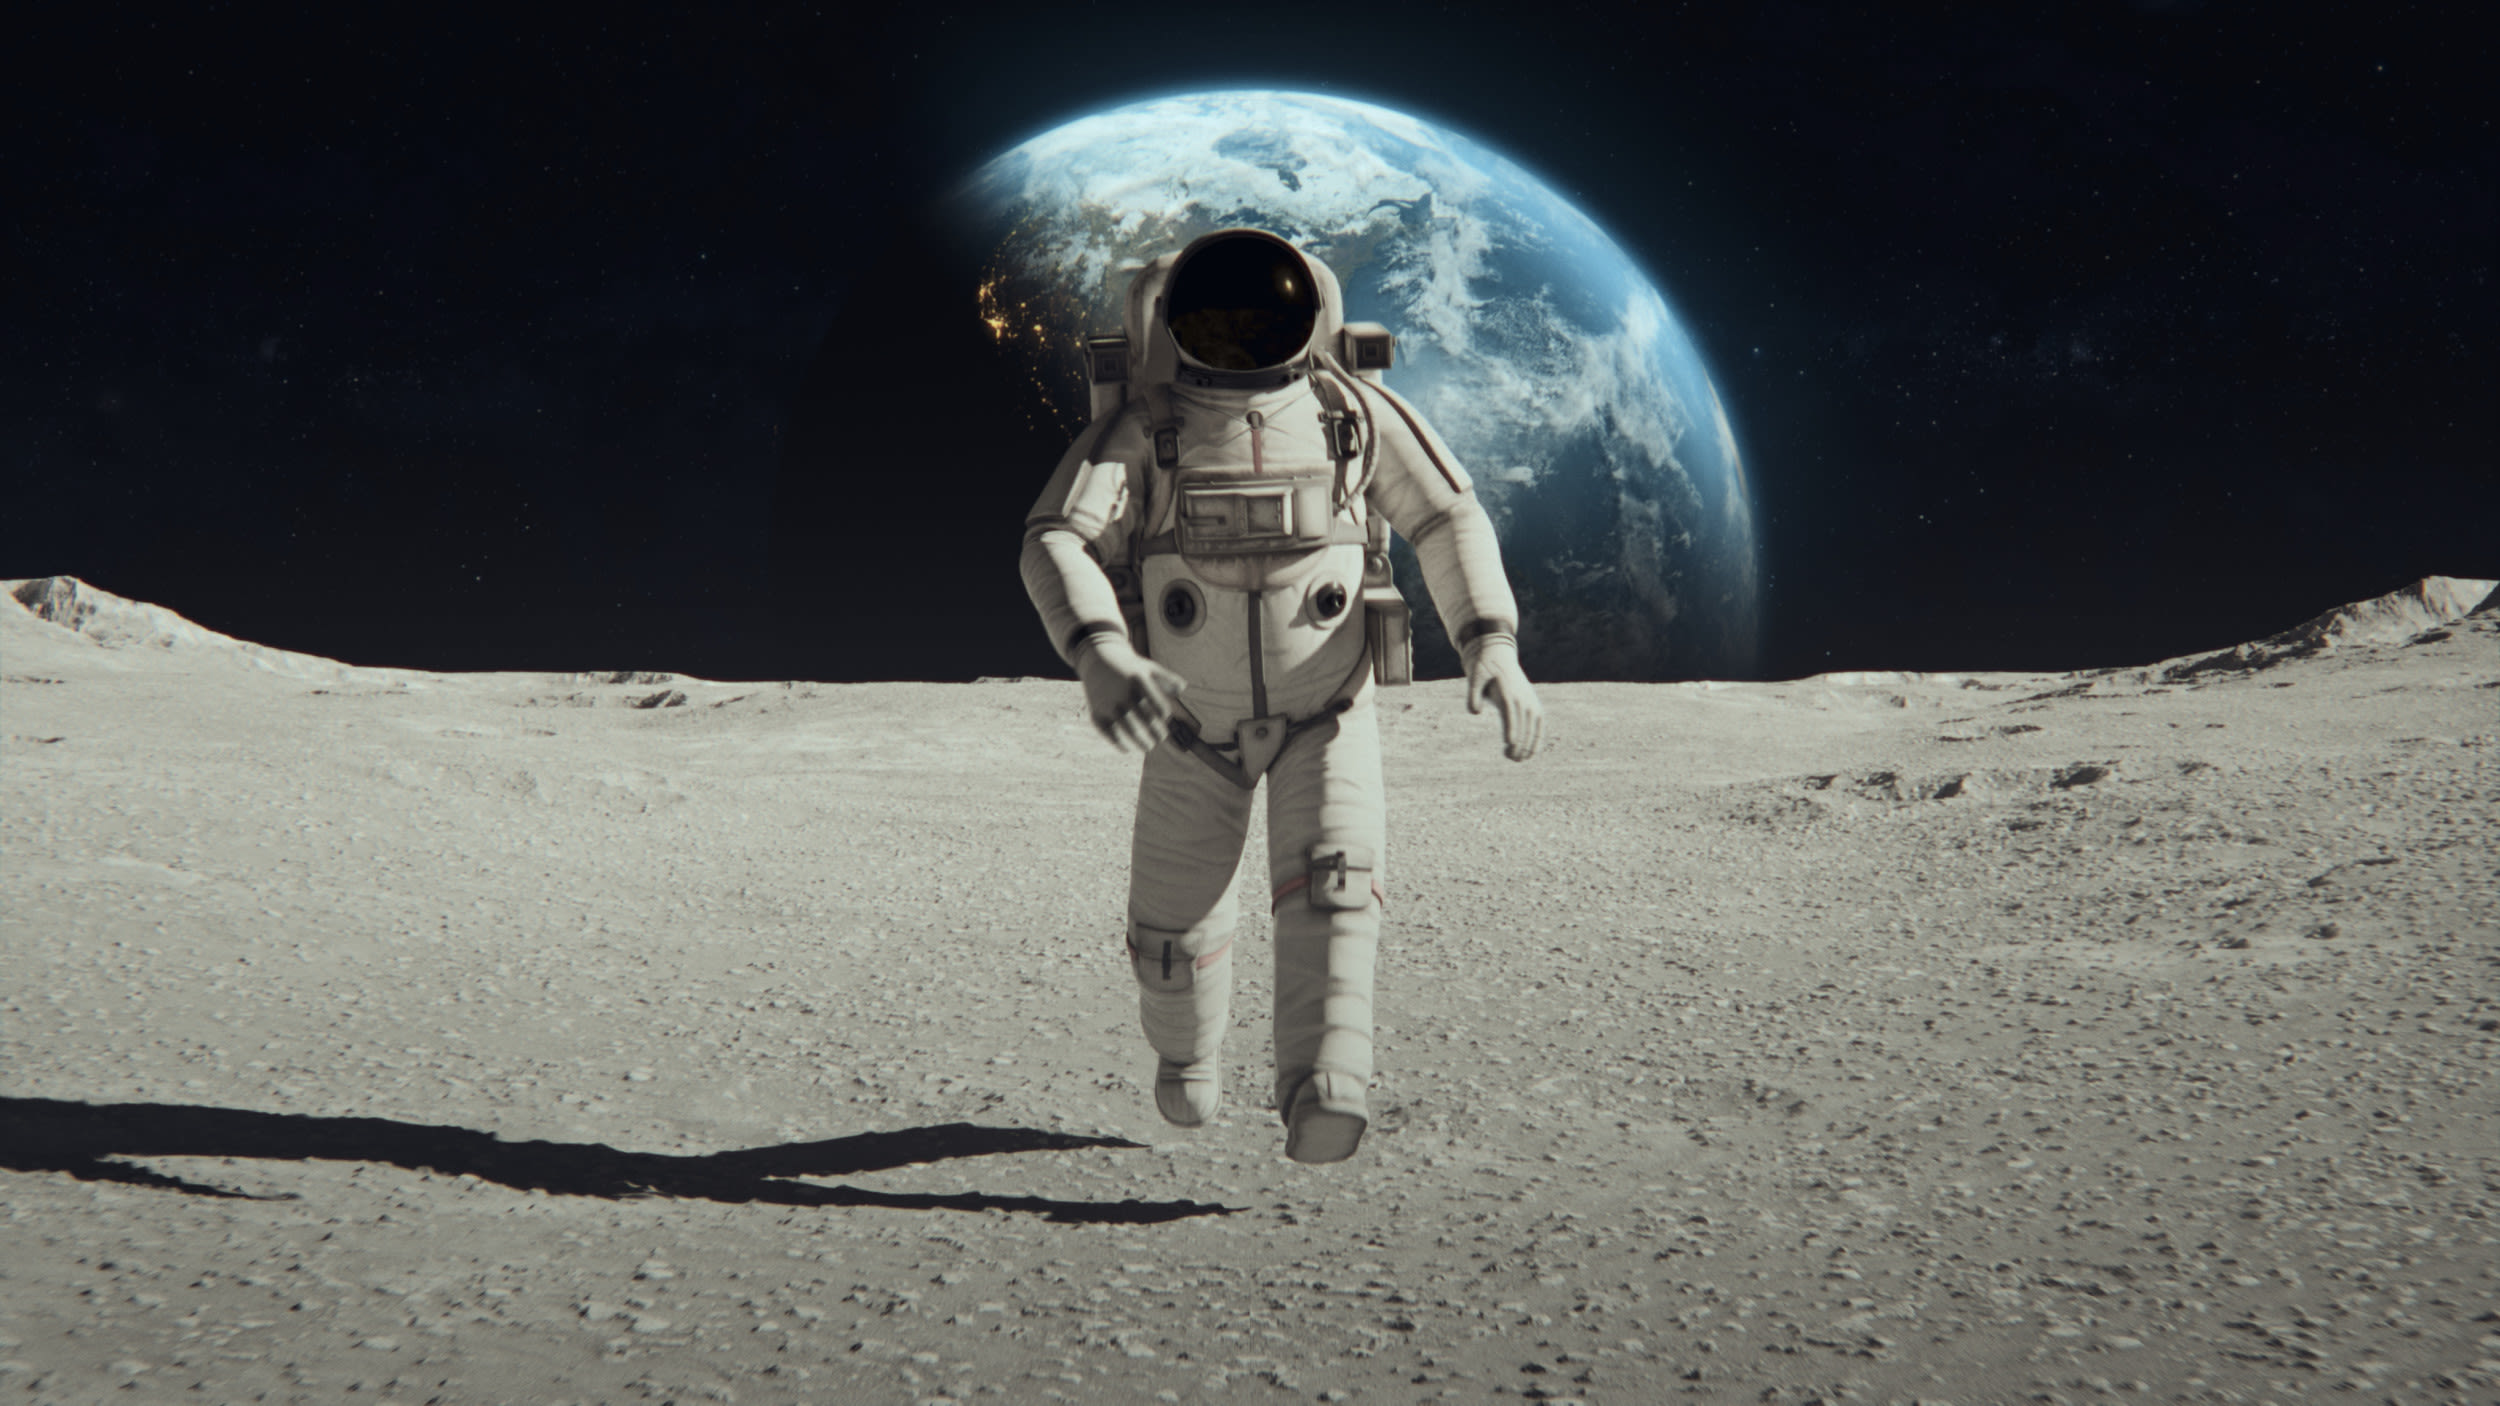 Moon may be riddled with cave networks astronauts could use as bases